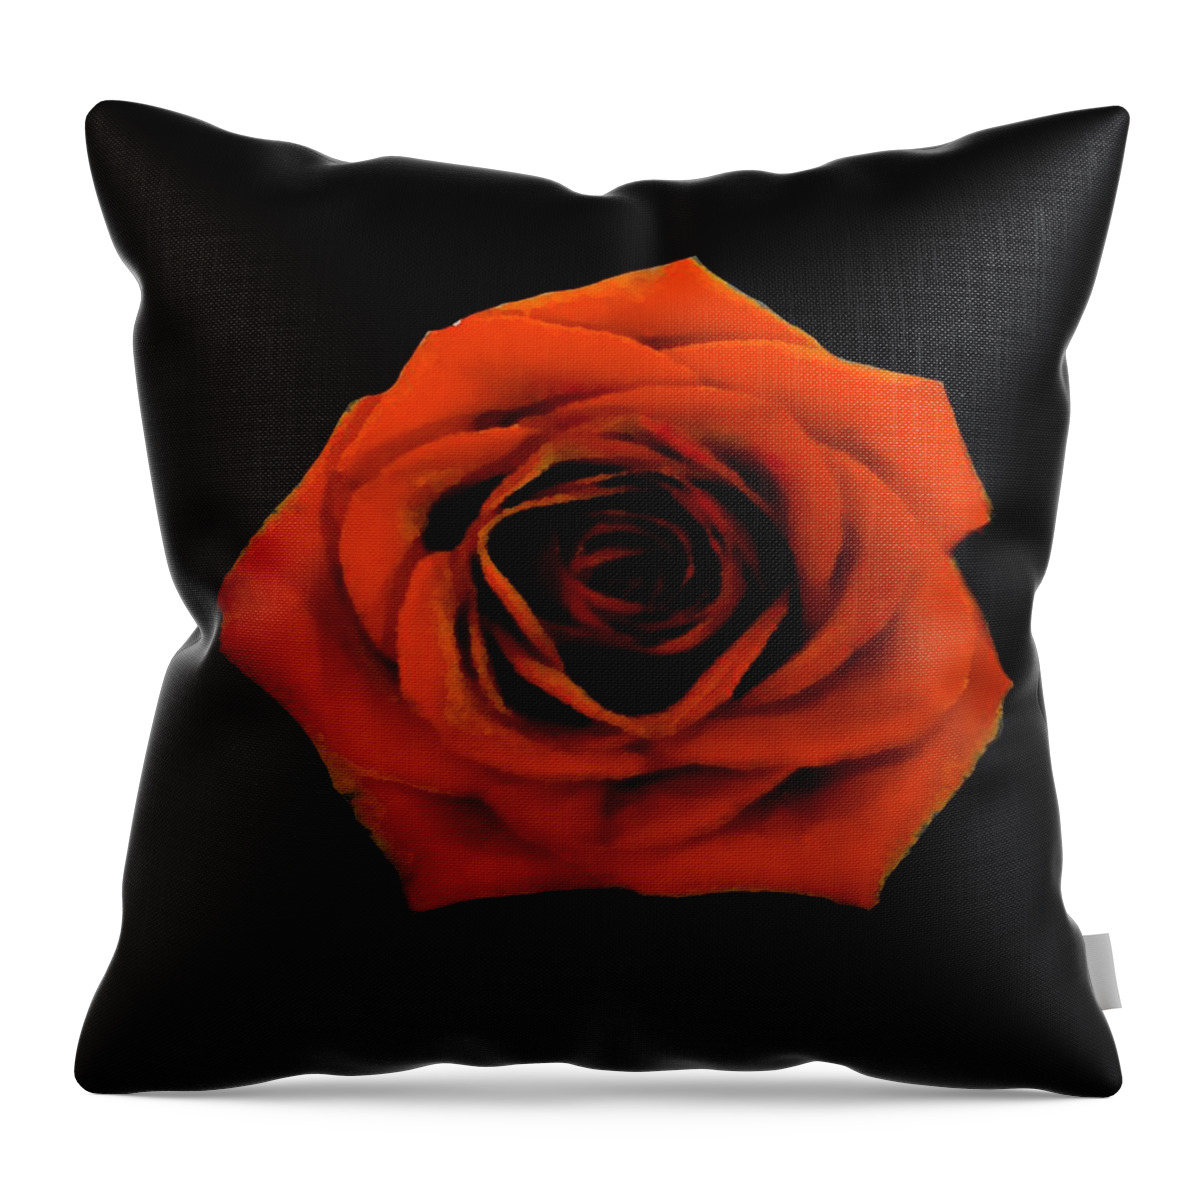 Photograph Throw Pillow featuring the mixed media Red Rose II Flower by Delynn Addams